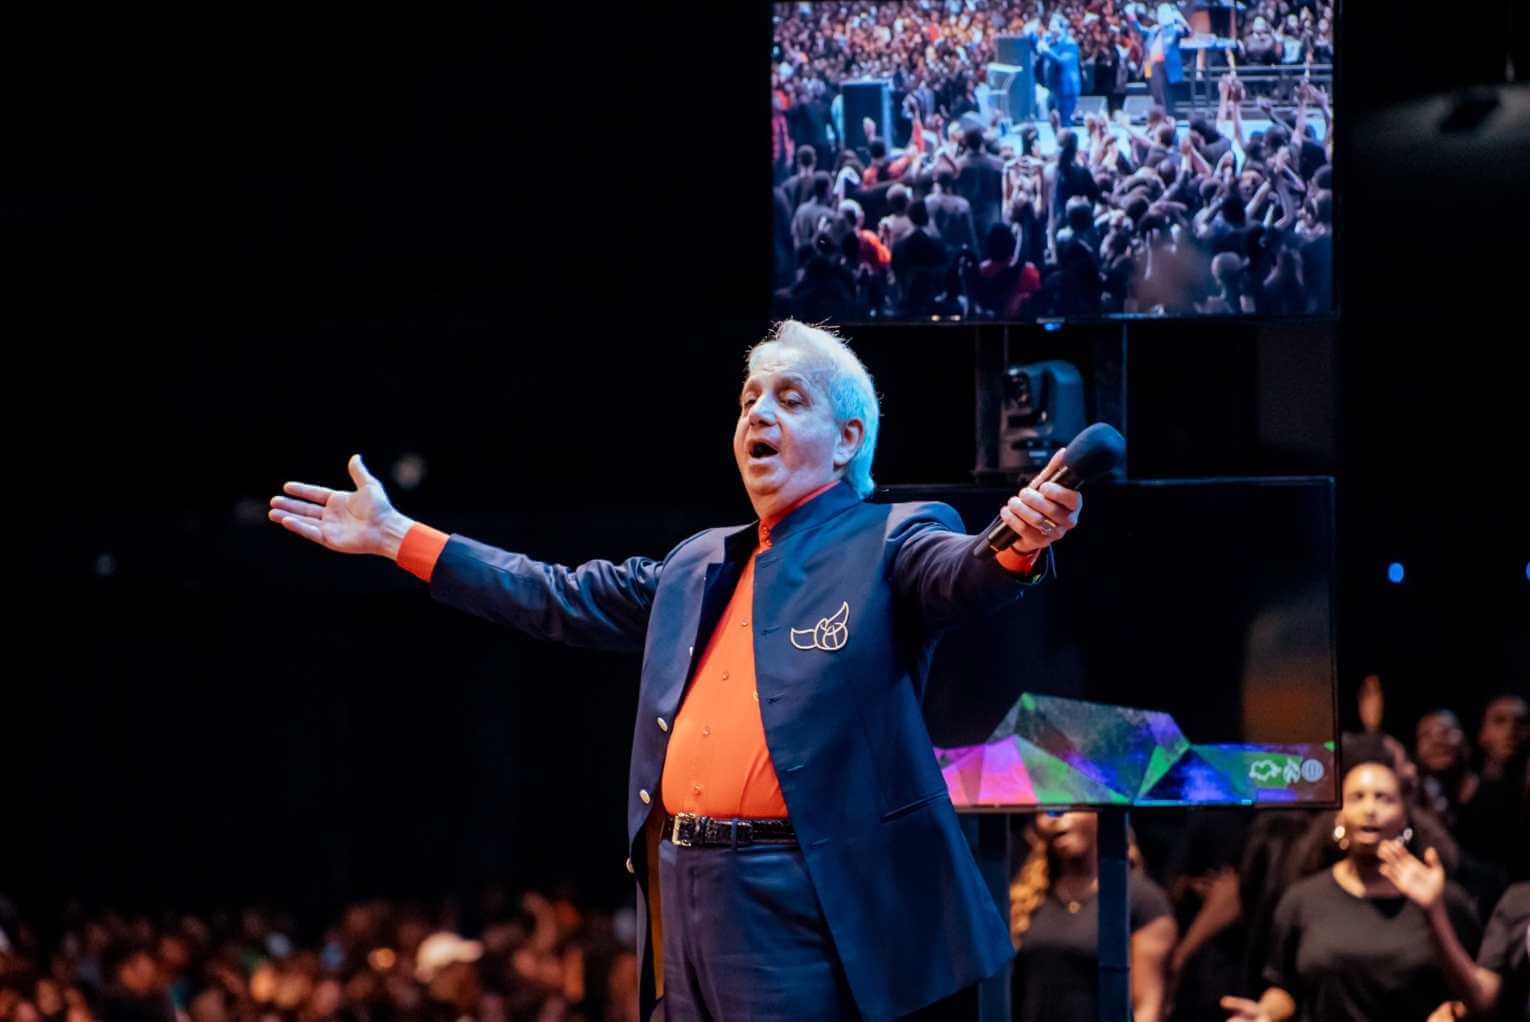 Morning Rundown: Benny Hinn: Does He Need to Repent?